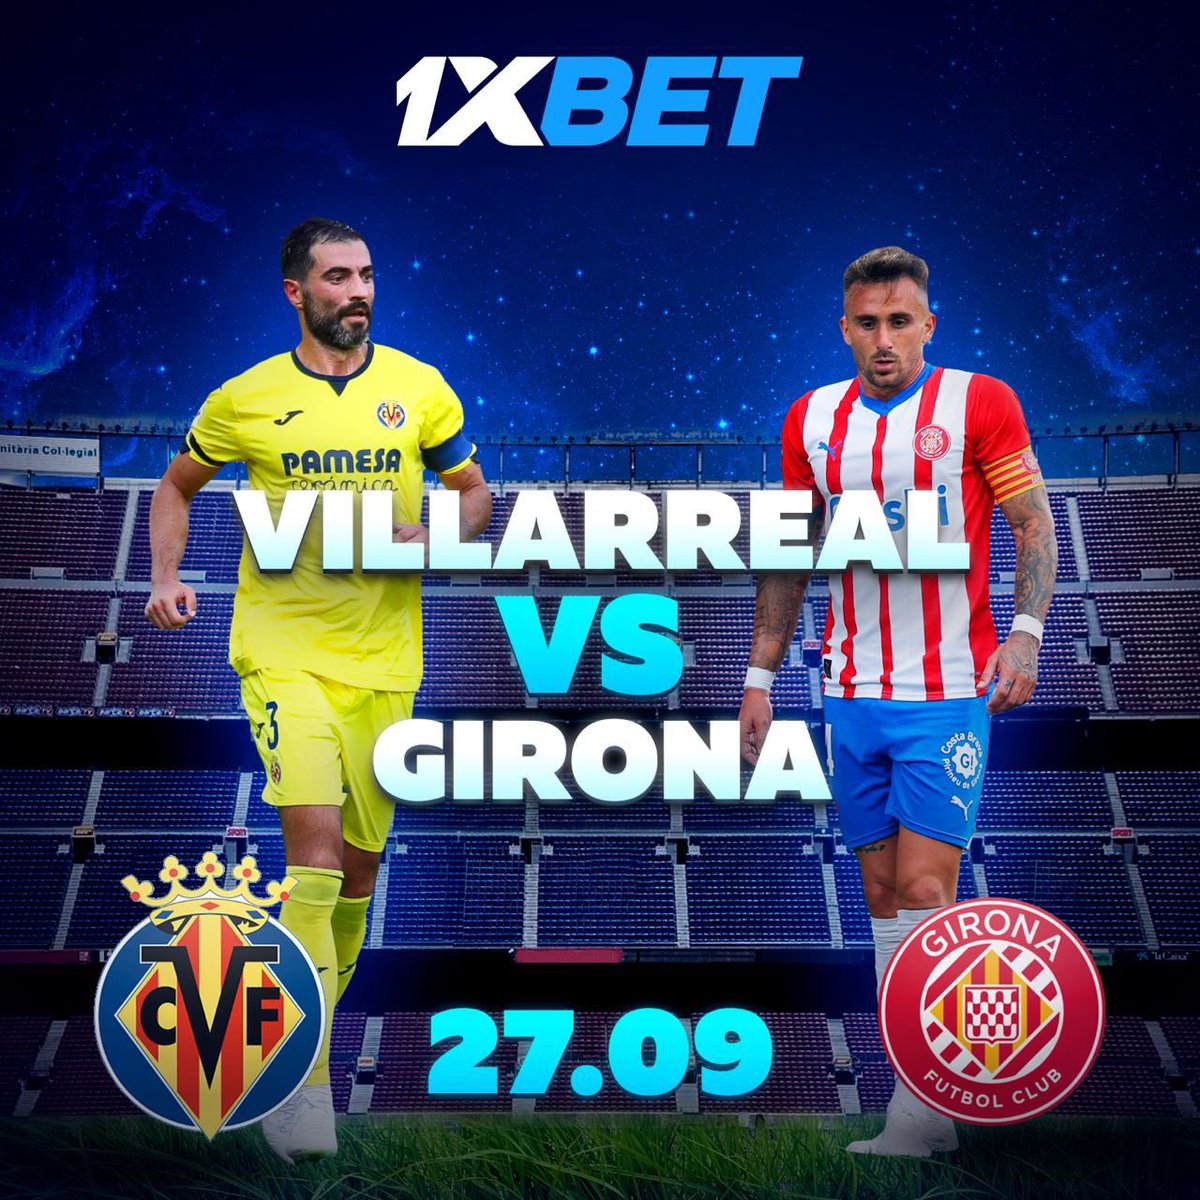 🤩🇪🇸Find the strongest: Villarreal vs Girona 

Make your prediction and add intrigue to every match in La Liga with 1xBet!

Using the link ➡️ bit.ly/447KINS and promo code: FRANKCUTEX for bonus on your win ⚽️